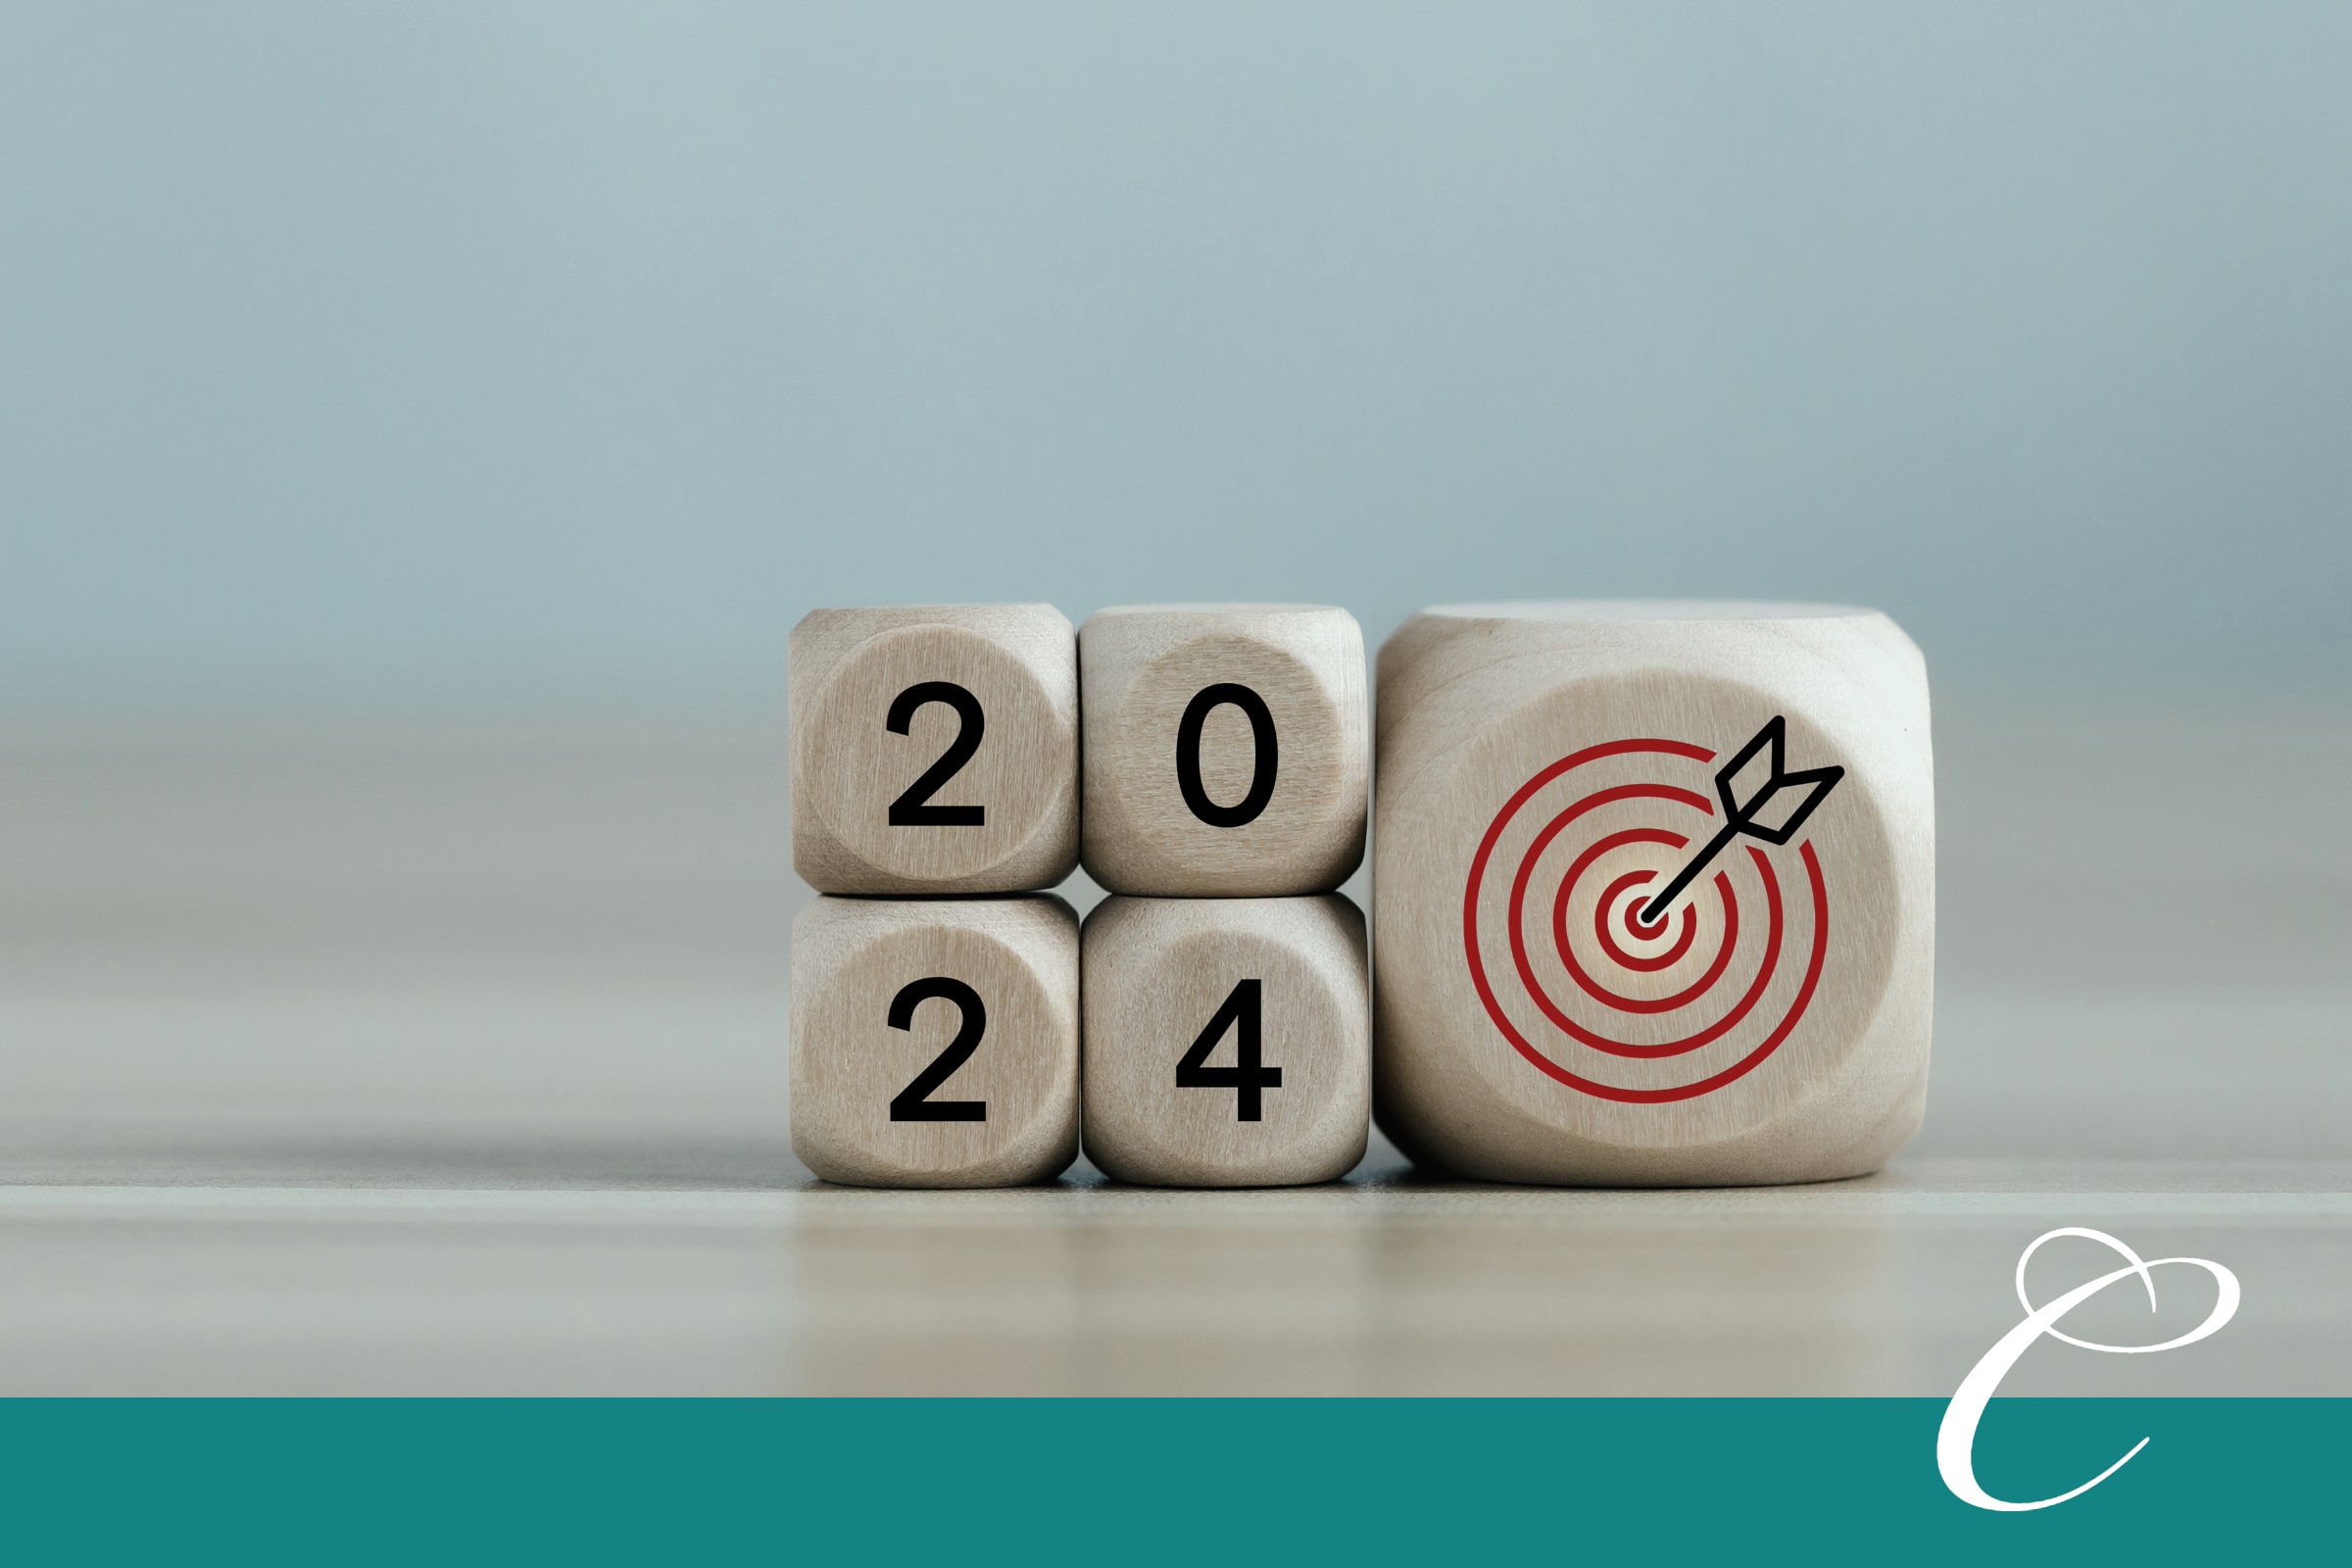 Year-end financial tips are designed to help you close out the year on a high note and prepare for success ahead.